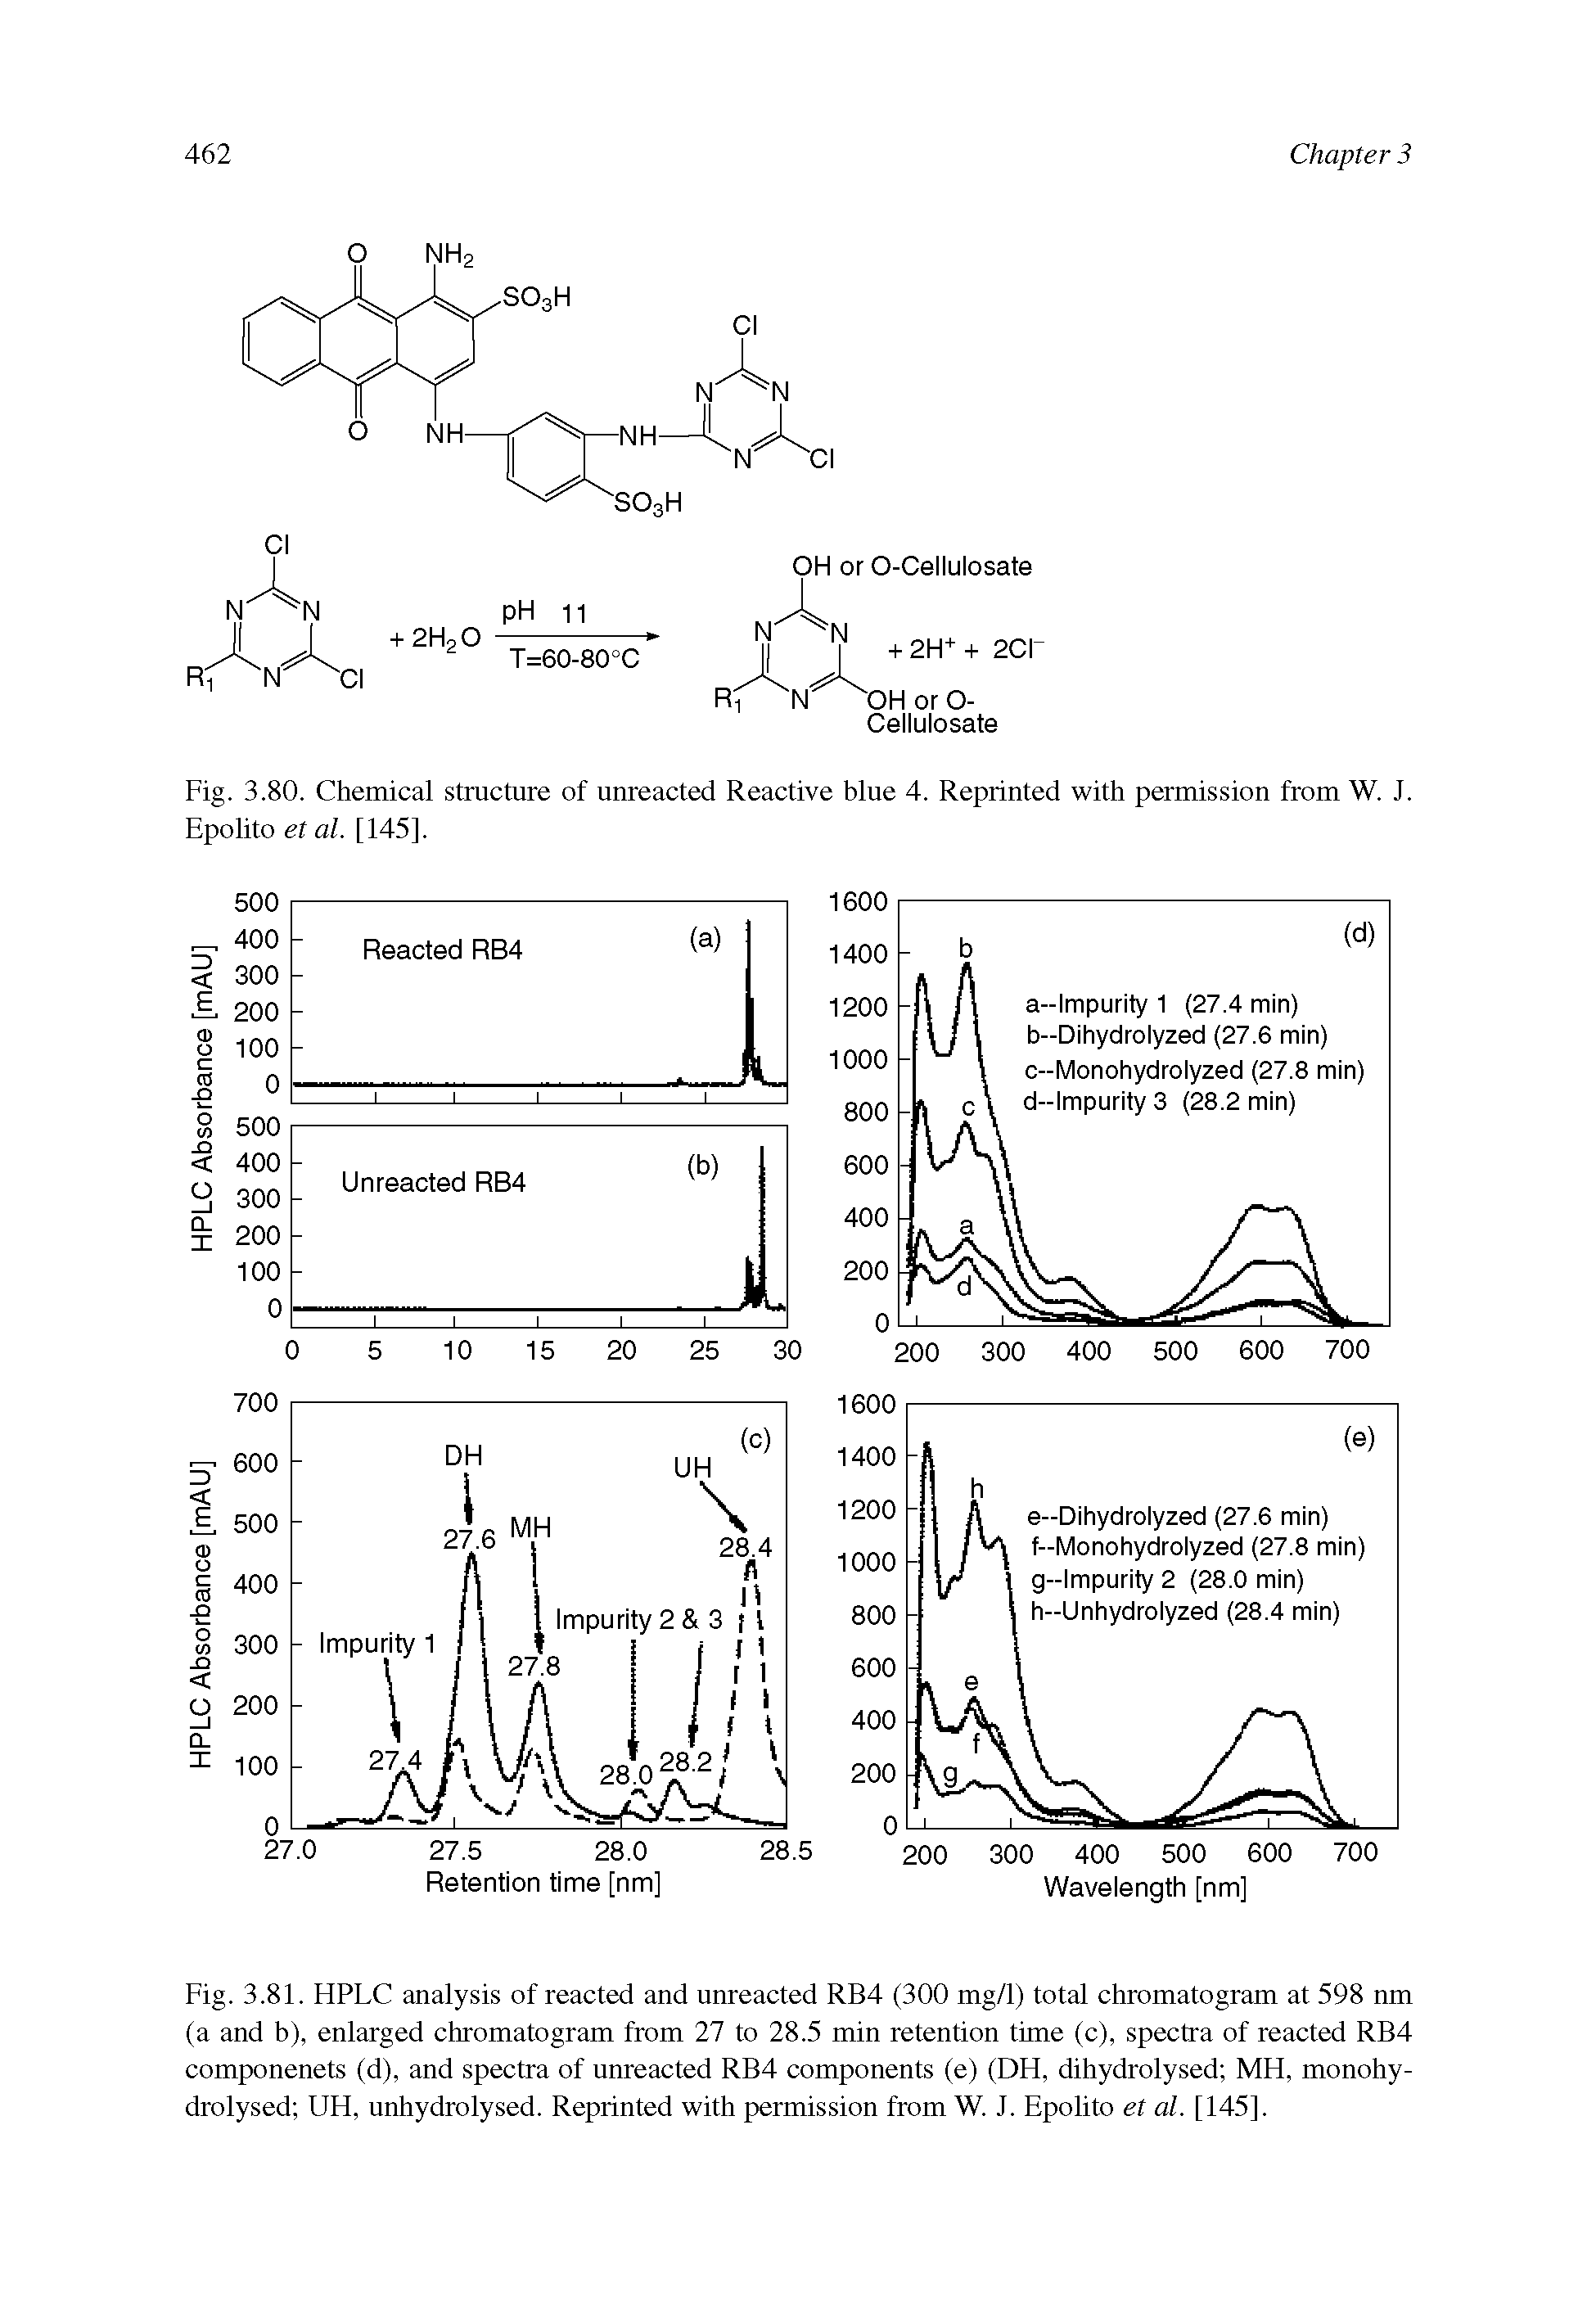 Fig. 3.81. HPLC analysis of reacted and unreacted RB4 (300 mg/1) total chromatogram at 598 nm (a and b), enlarged chromatogram from 27 to 28.5 min retention time (c), spectra of reacted RB4 componenets (d), and spectra of unreacted RB4 components (e) (DH, dihydrolysed MH, monohy-drolysed UH, unhydrolysed. Reprinted with permission from W. J. Epolito et al. [145].